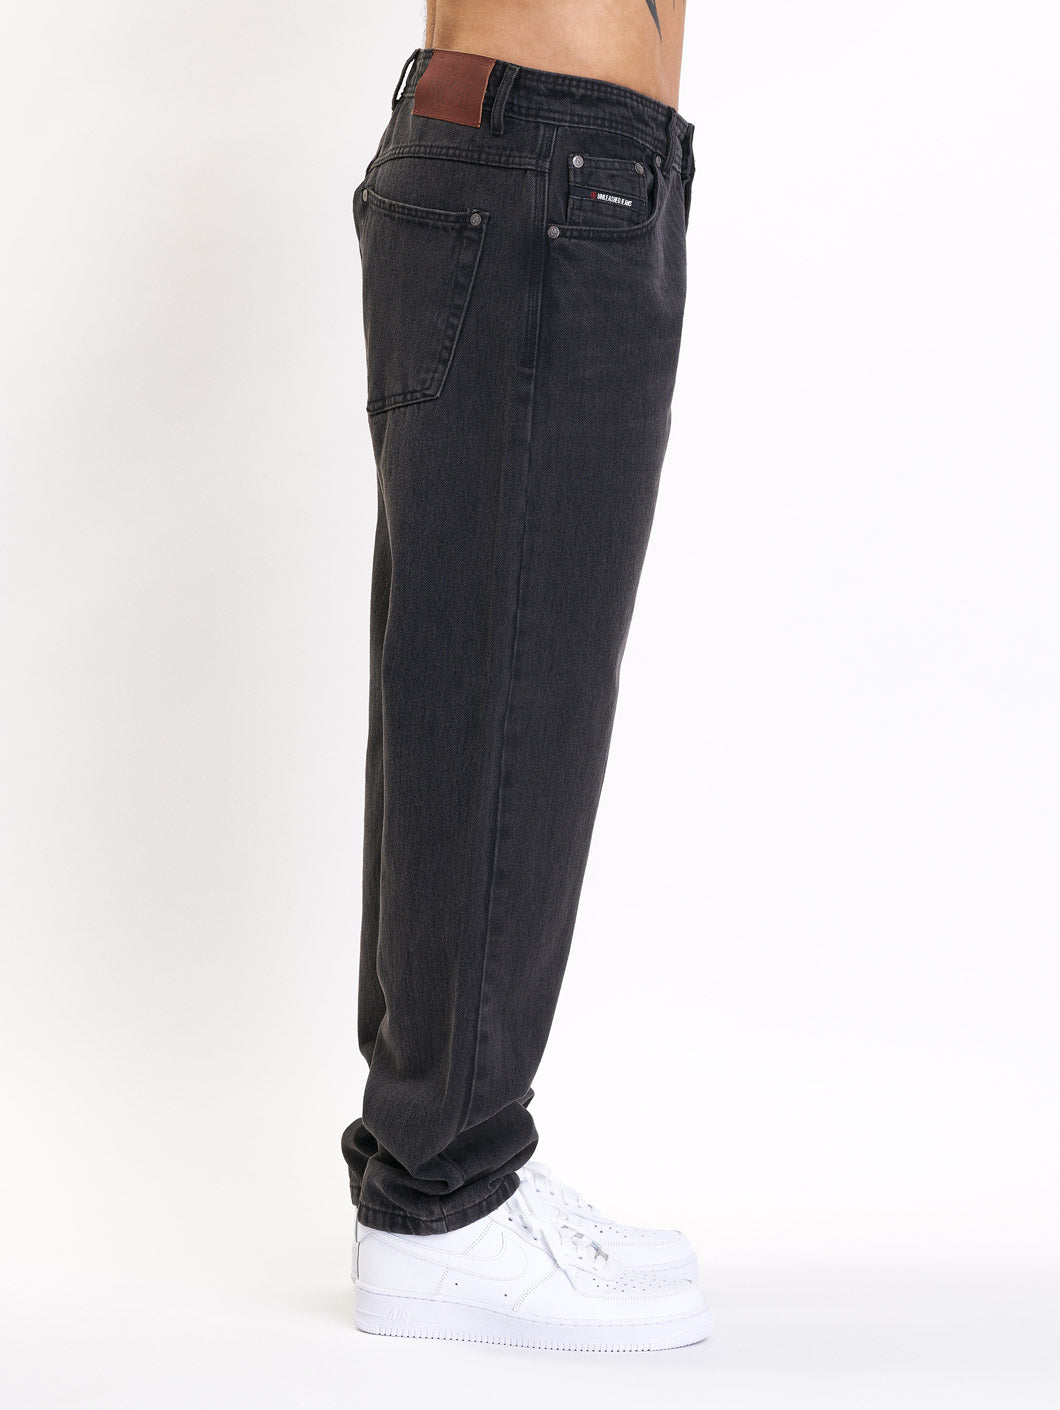 mox unleashed jeans - 6